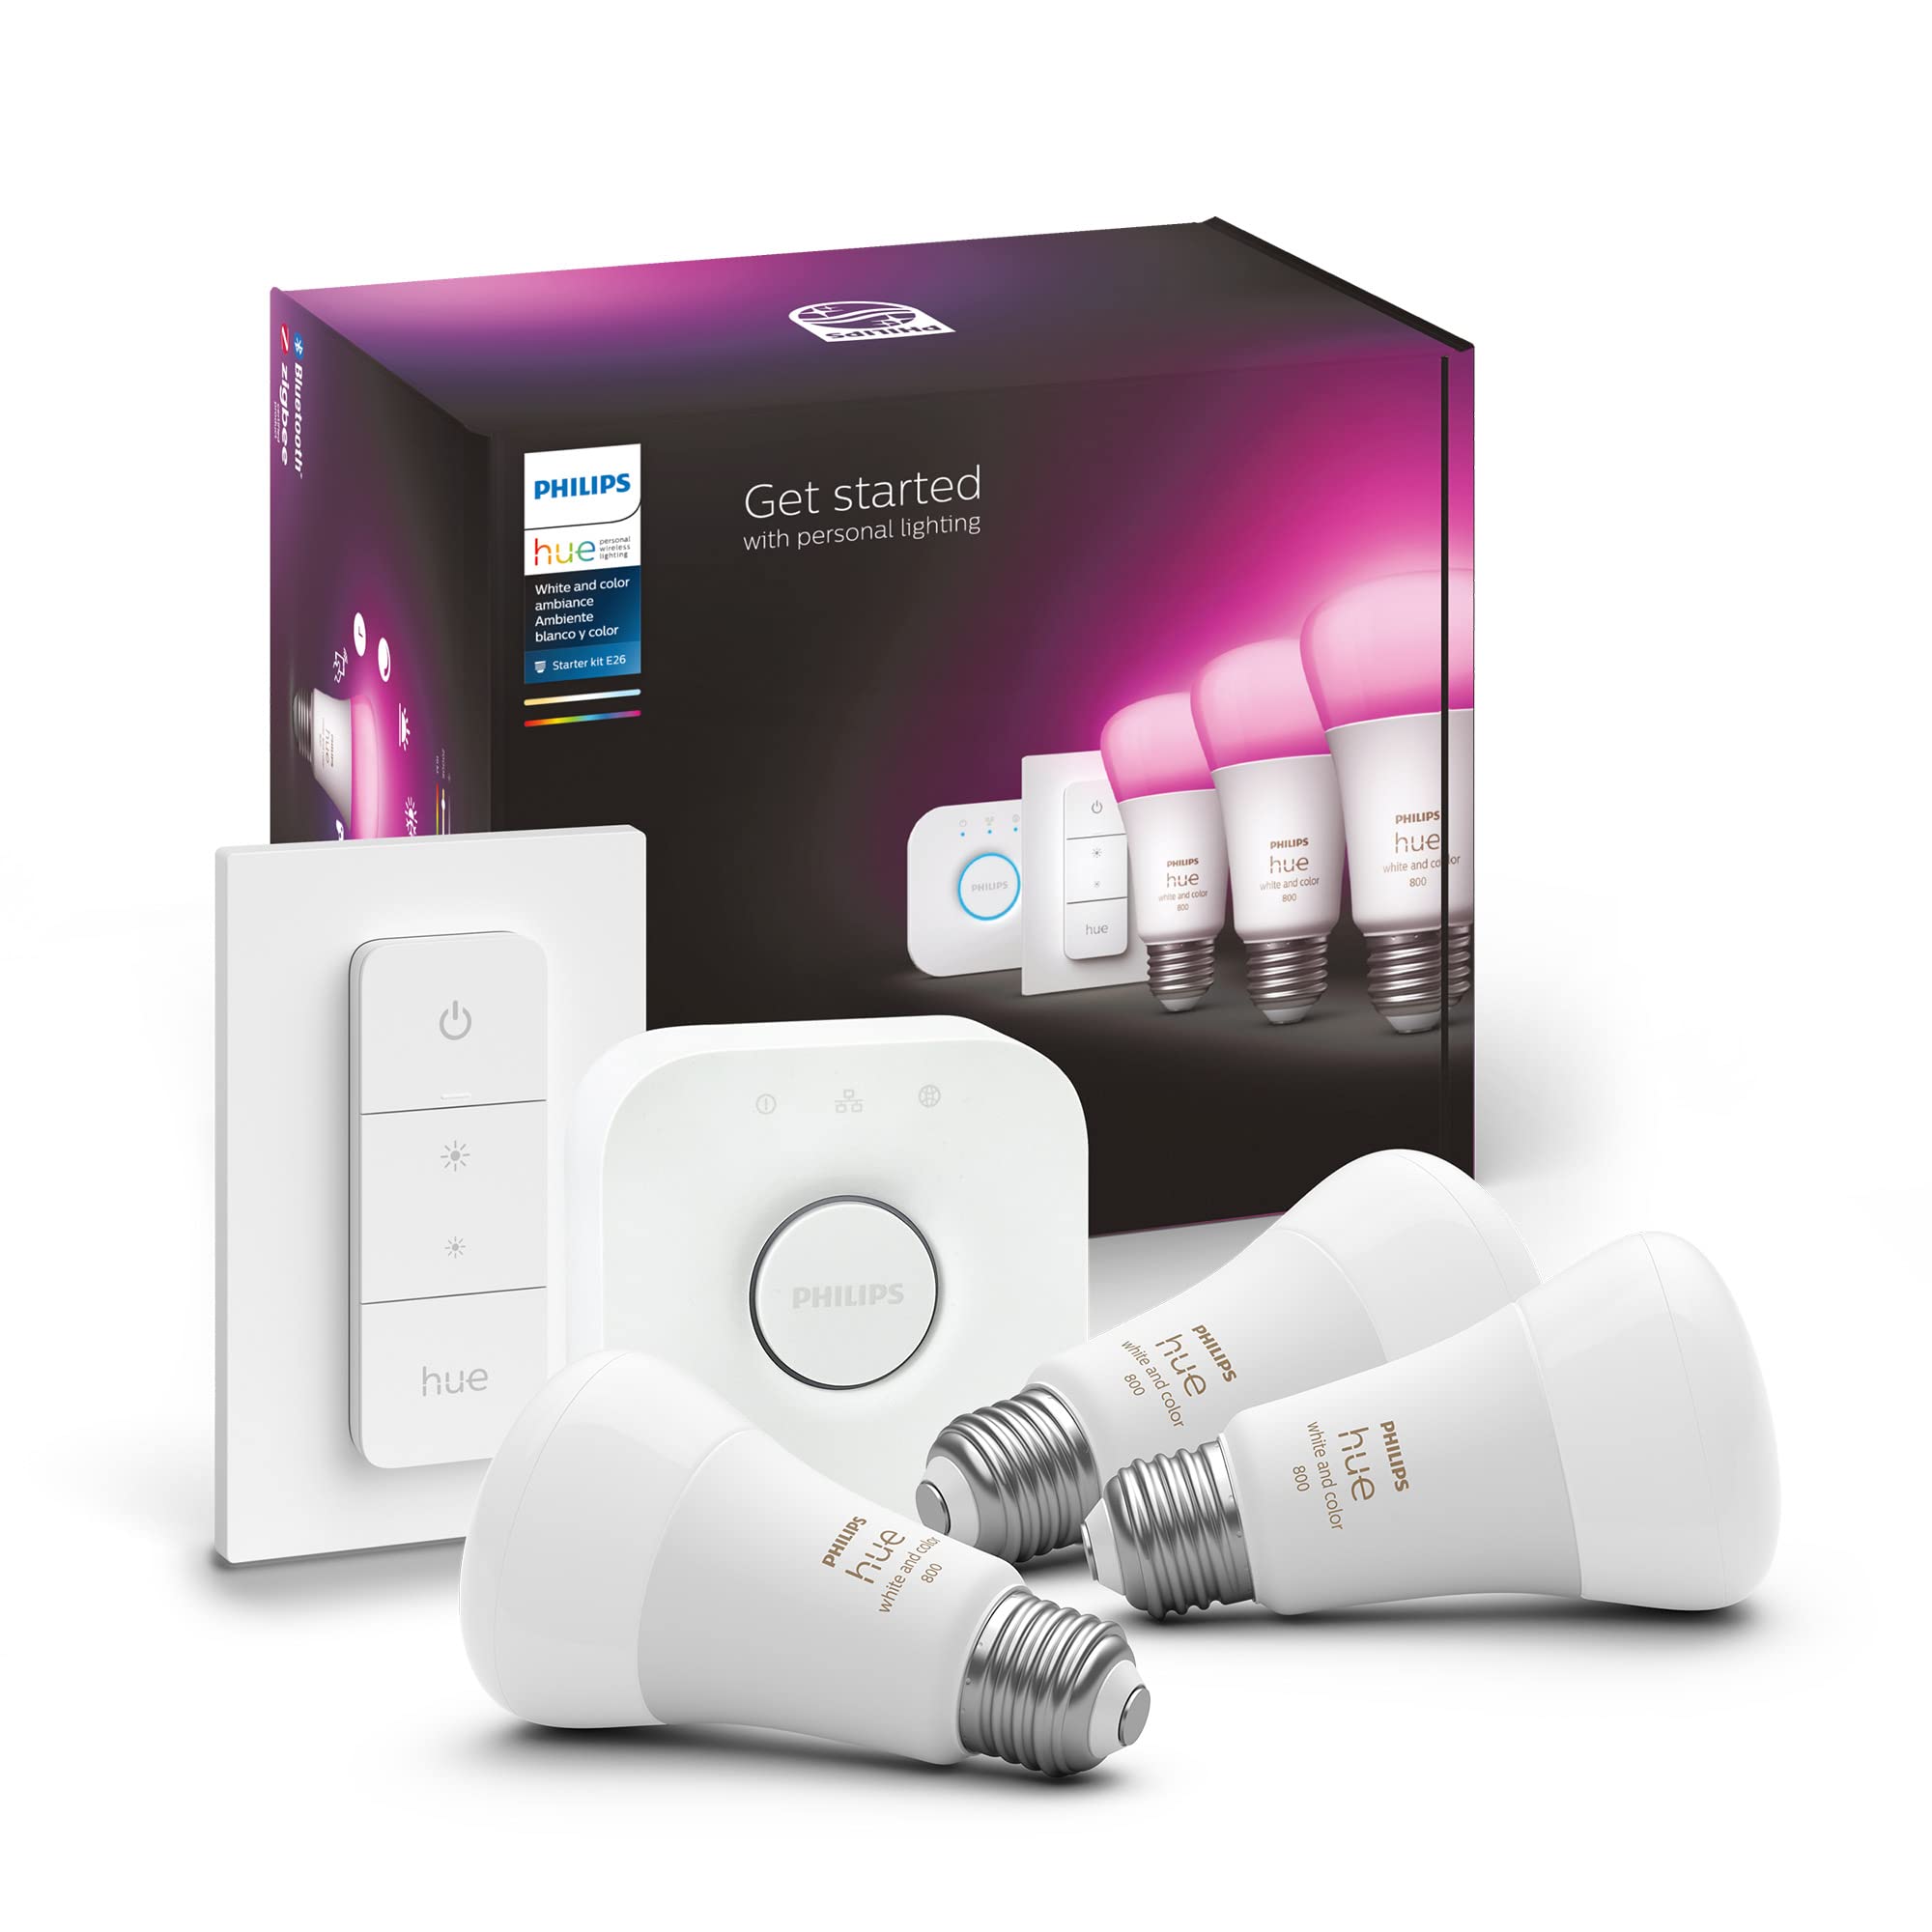 Philips Hue MAIN-54158 White & Color Ambiance LED Starter Kit-3 Multicolor A19 Bulbs, Bridge and Hue Dimmer Switch (Gen 3-Richer Colors), 1 Count (Pack of 1), Multi